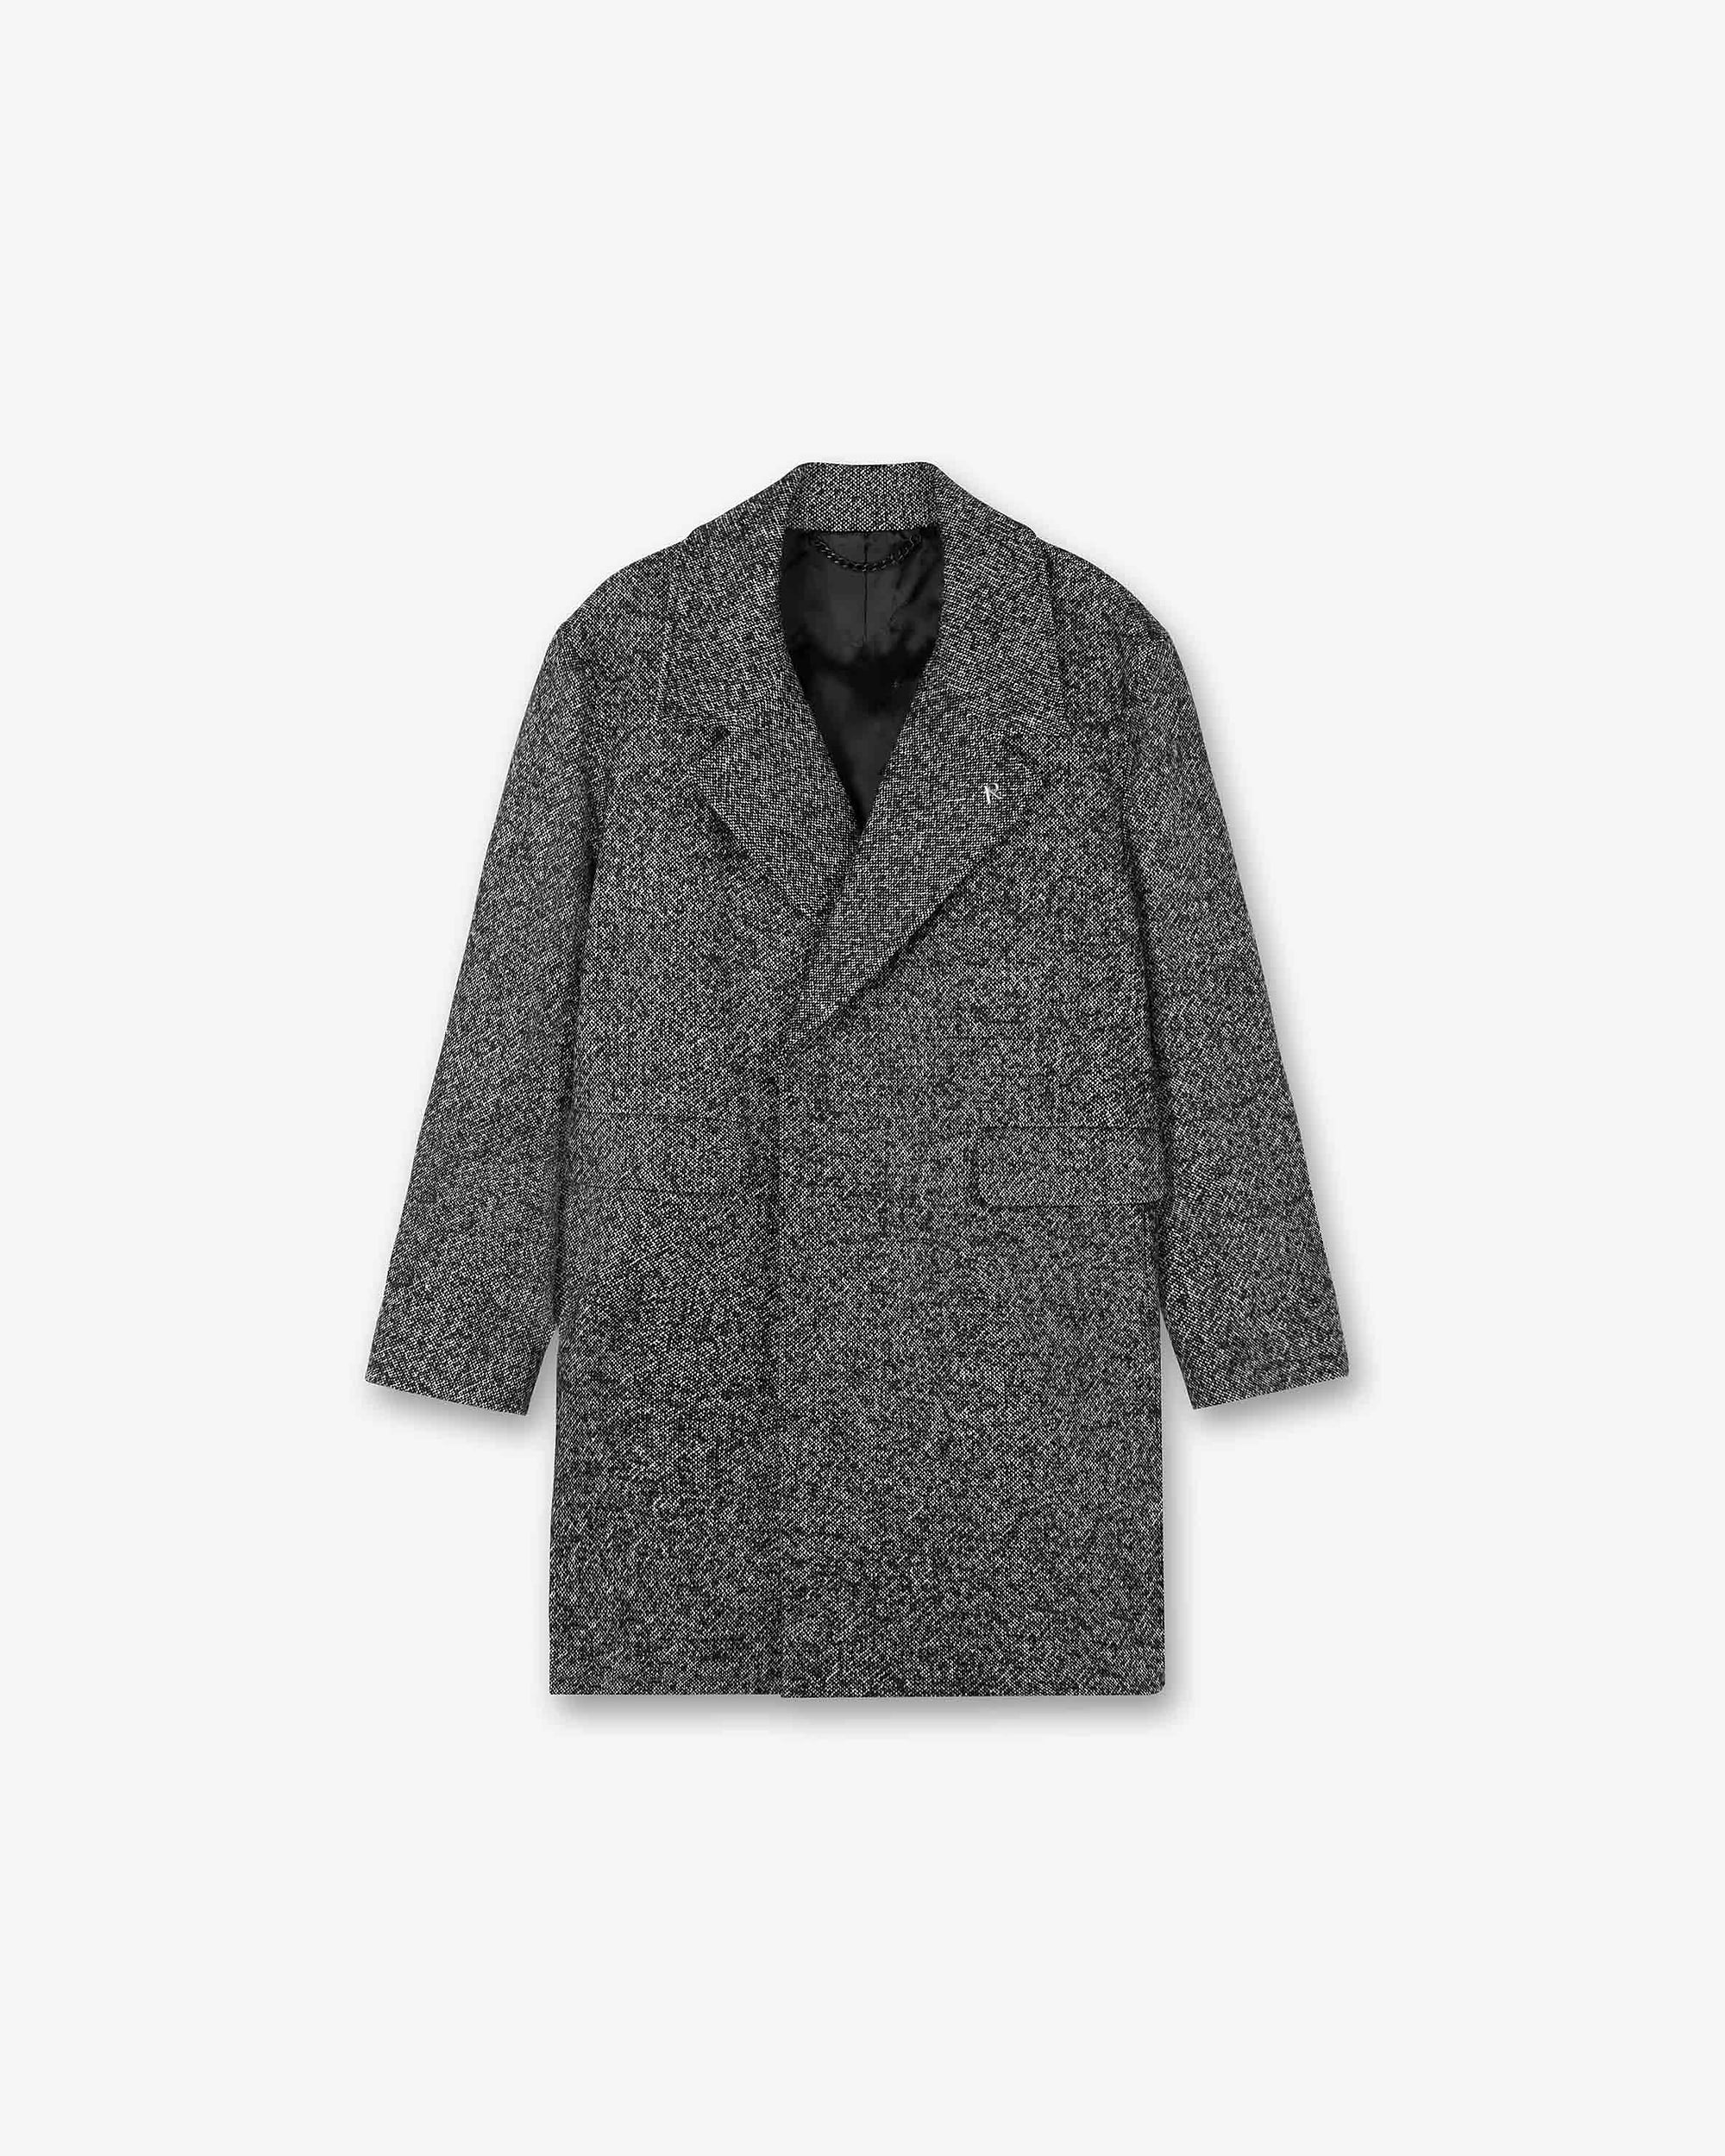 Double Breasted Overcoat - Black White